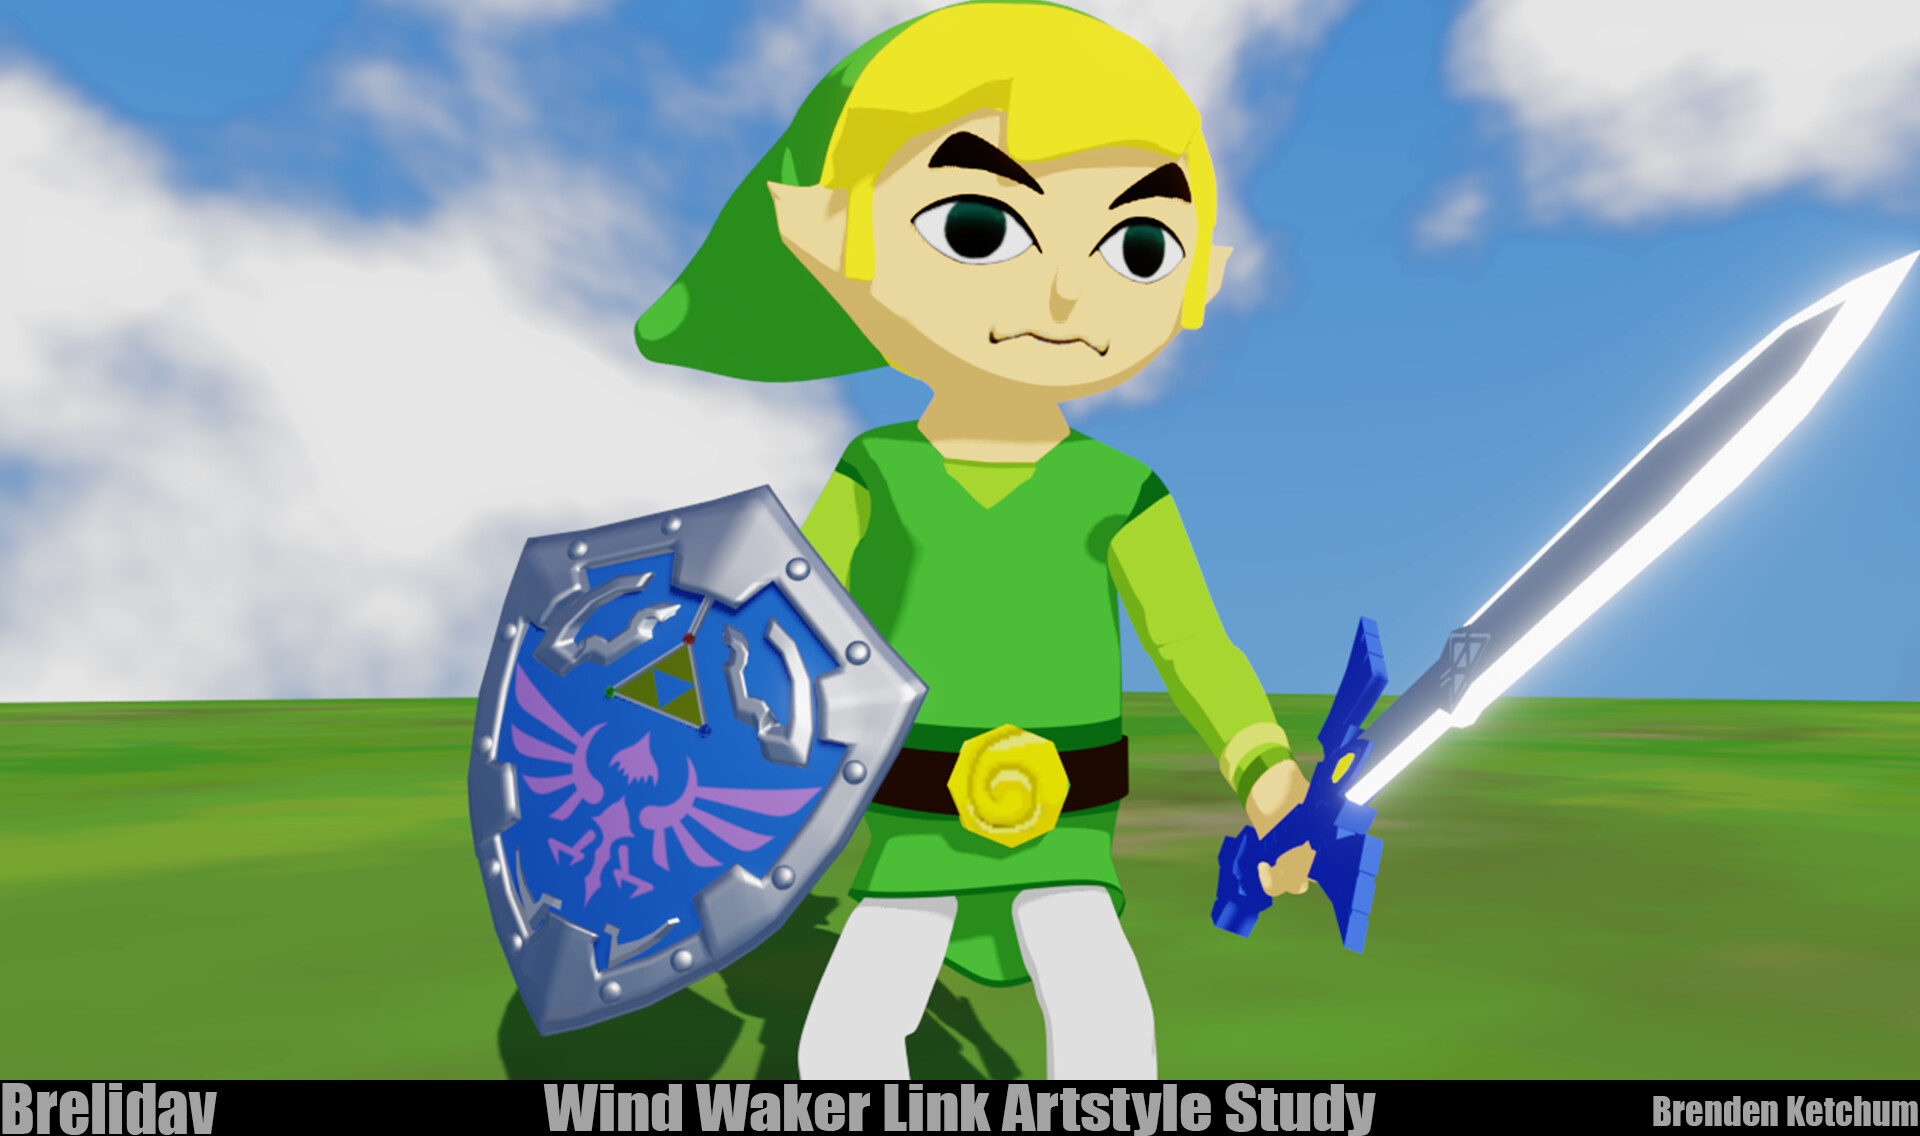 10. "Link with Blue Hair" by The Wind Waker - wide 1